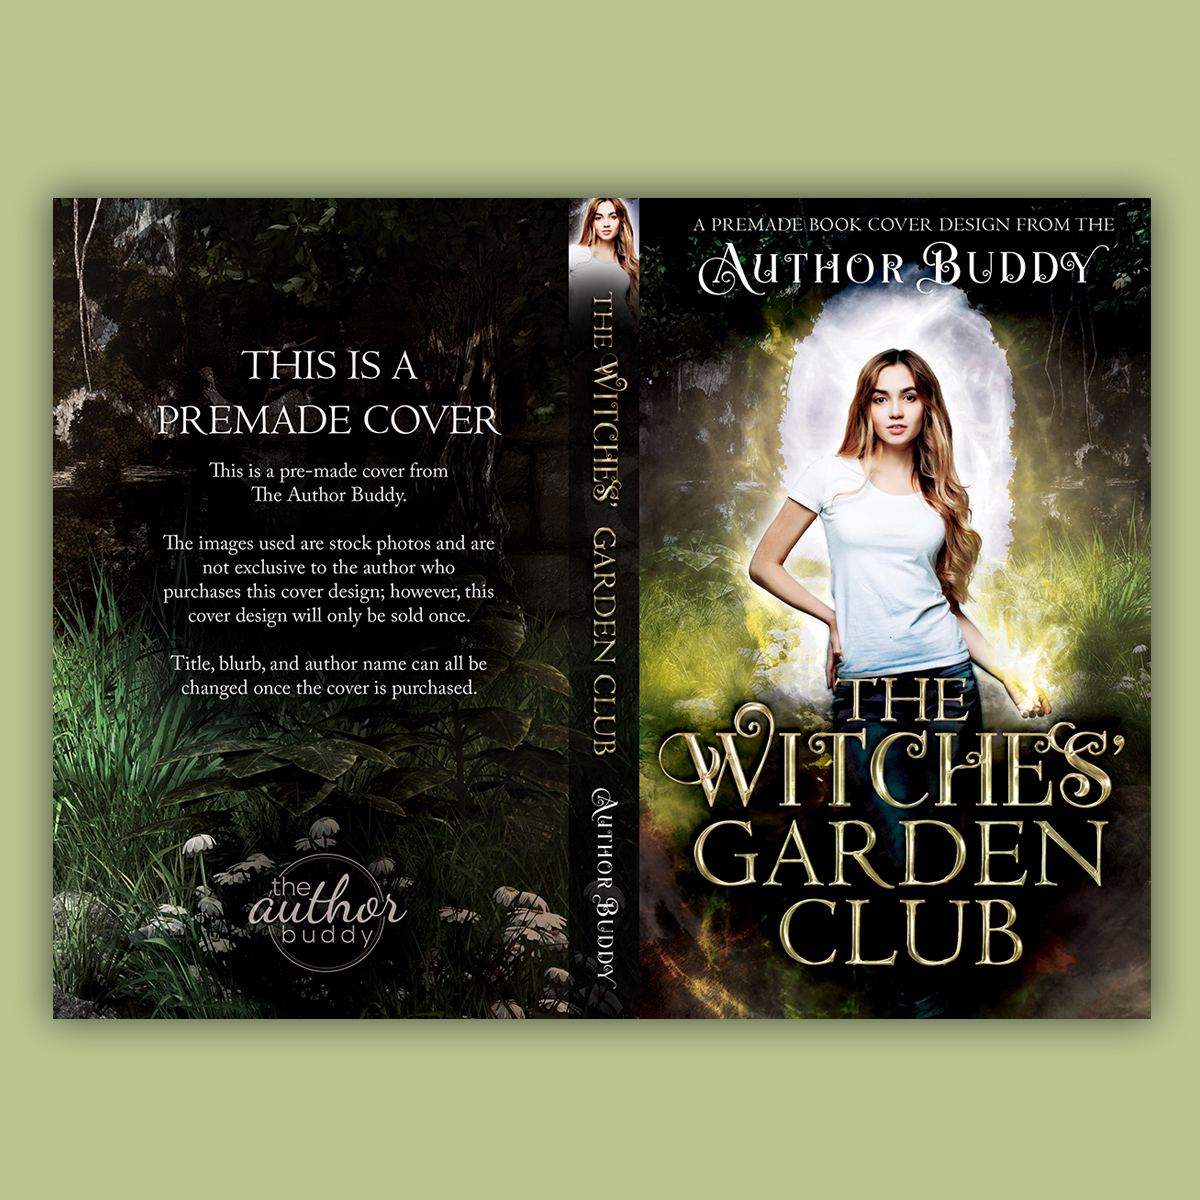 The Witches' Garden Club - Premade Paranormal Book Cover from The Author Buddy